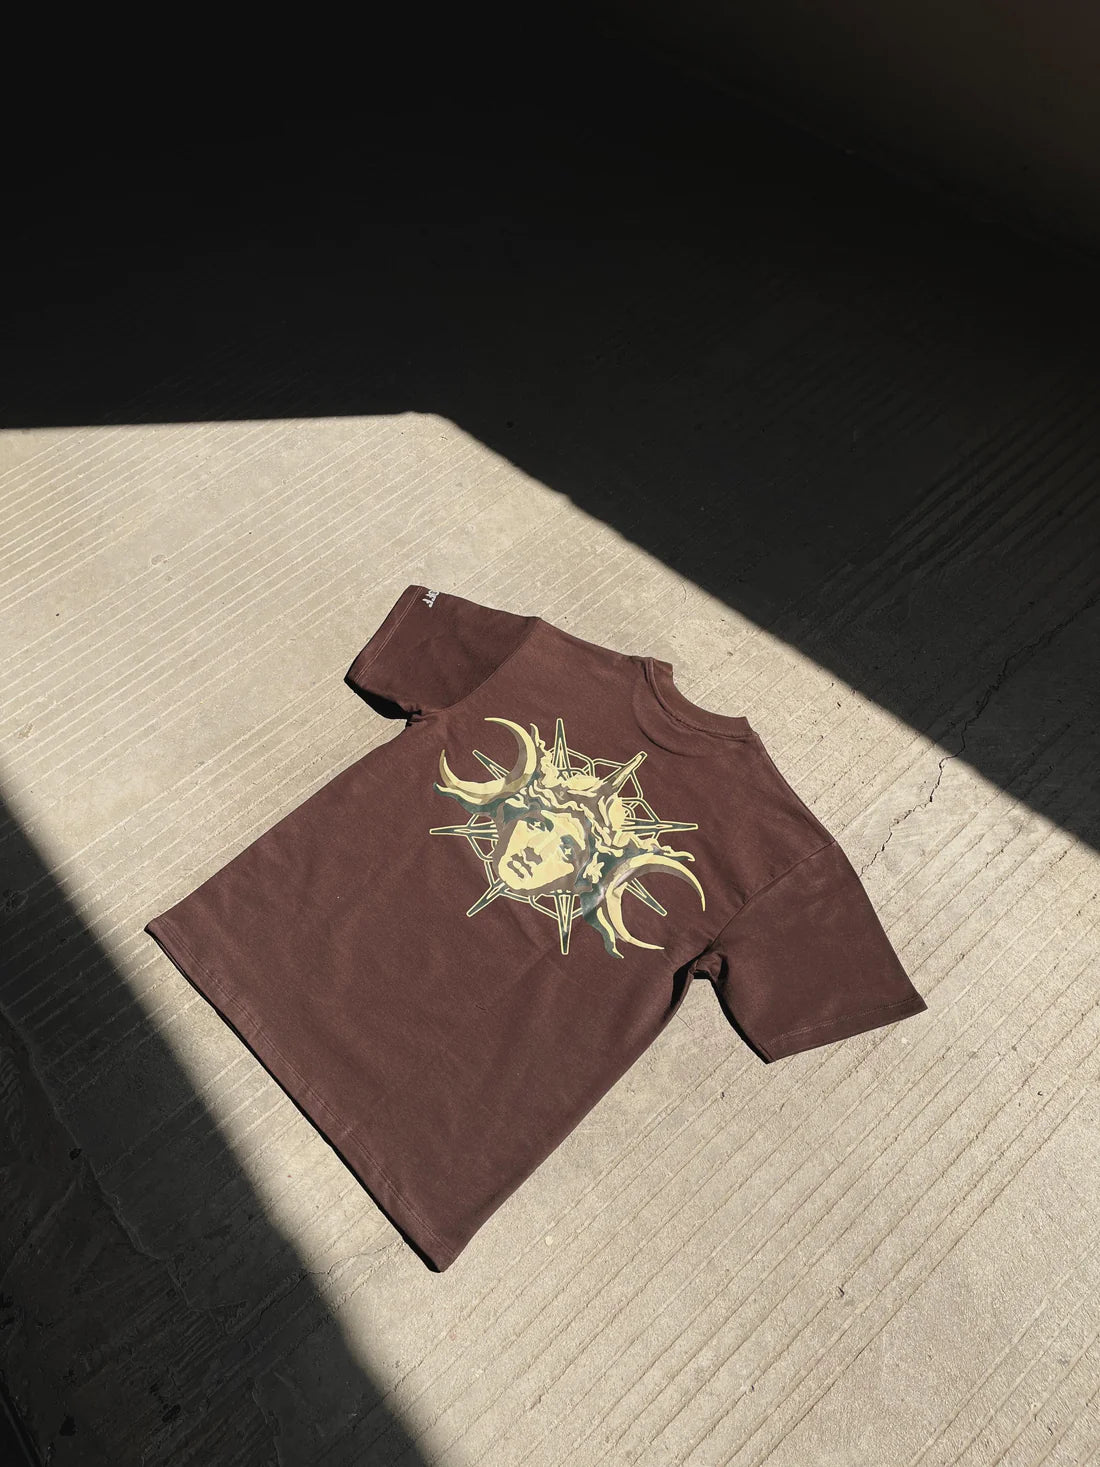 Ripoff Astral Vision Tee